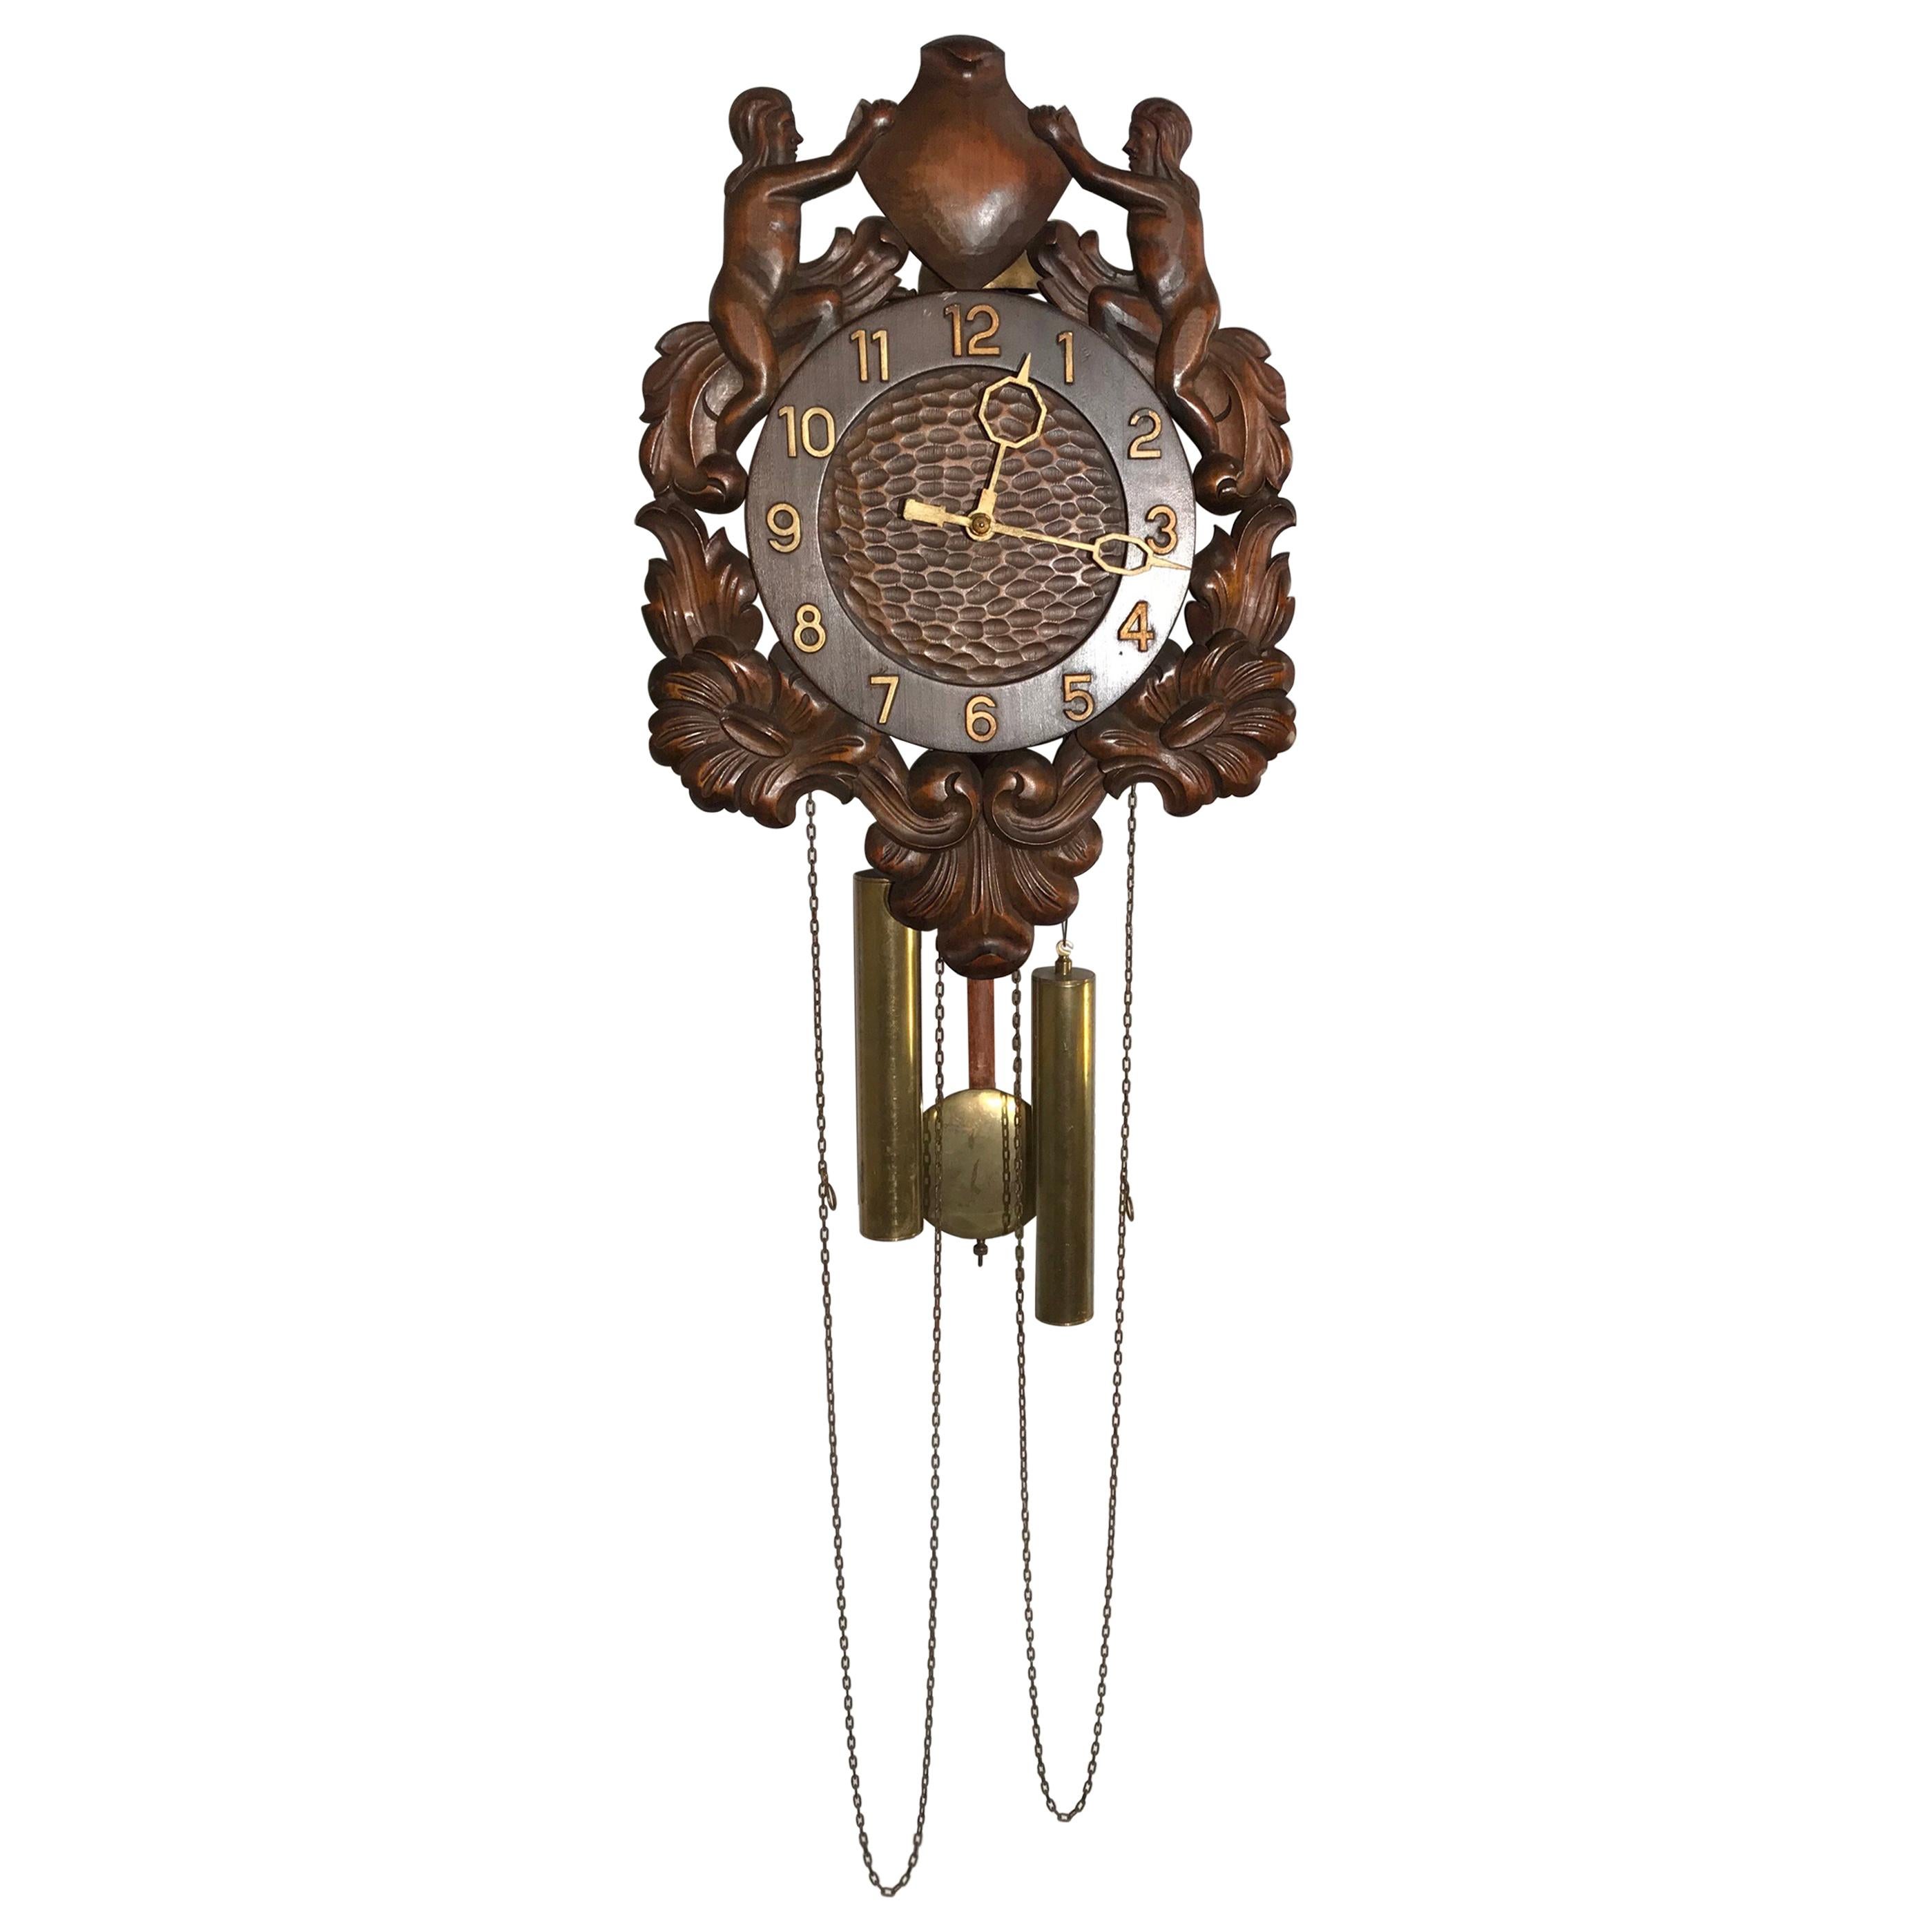 Unique Denmark Made Classical Roman Wall Clock with Sculptures and Flowers